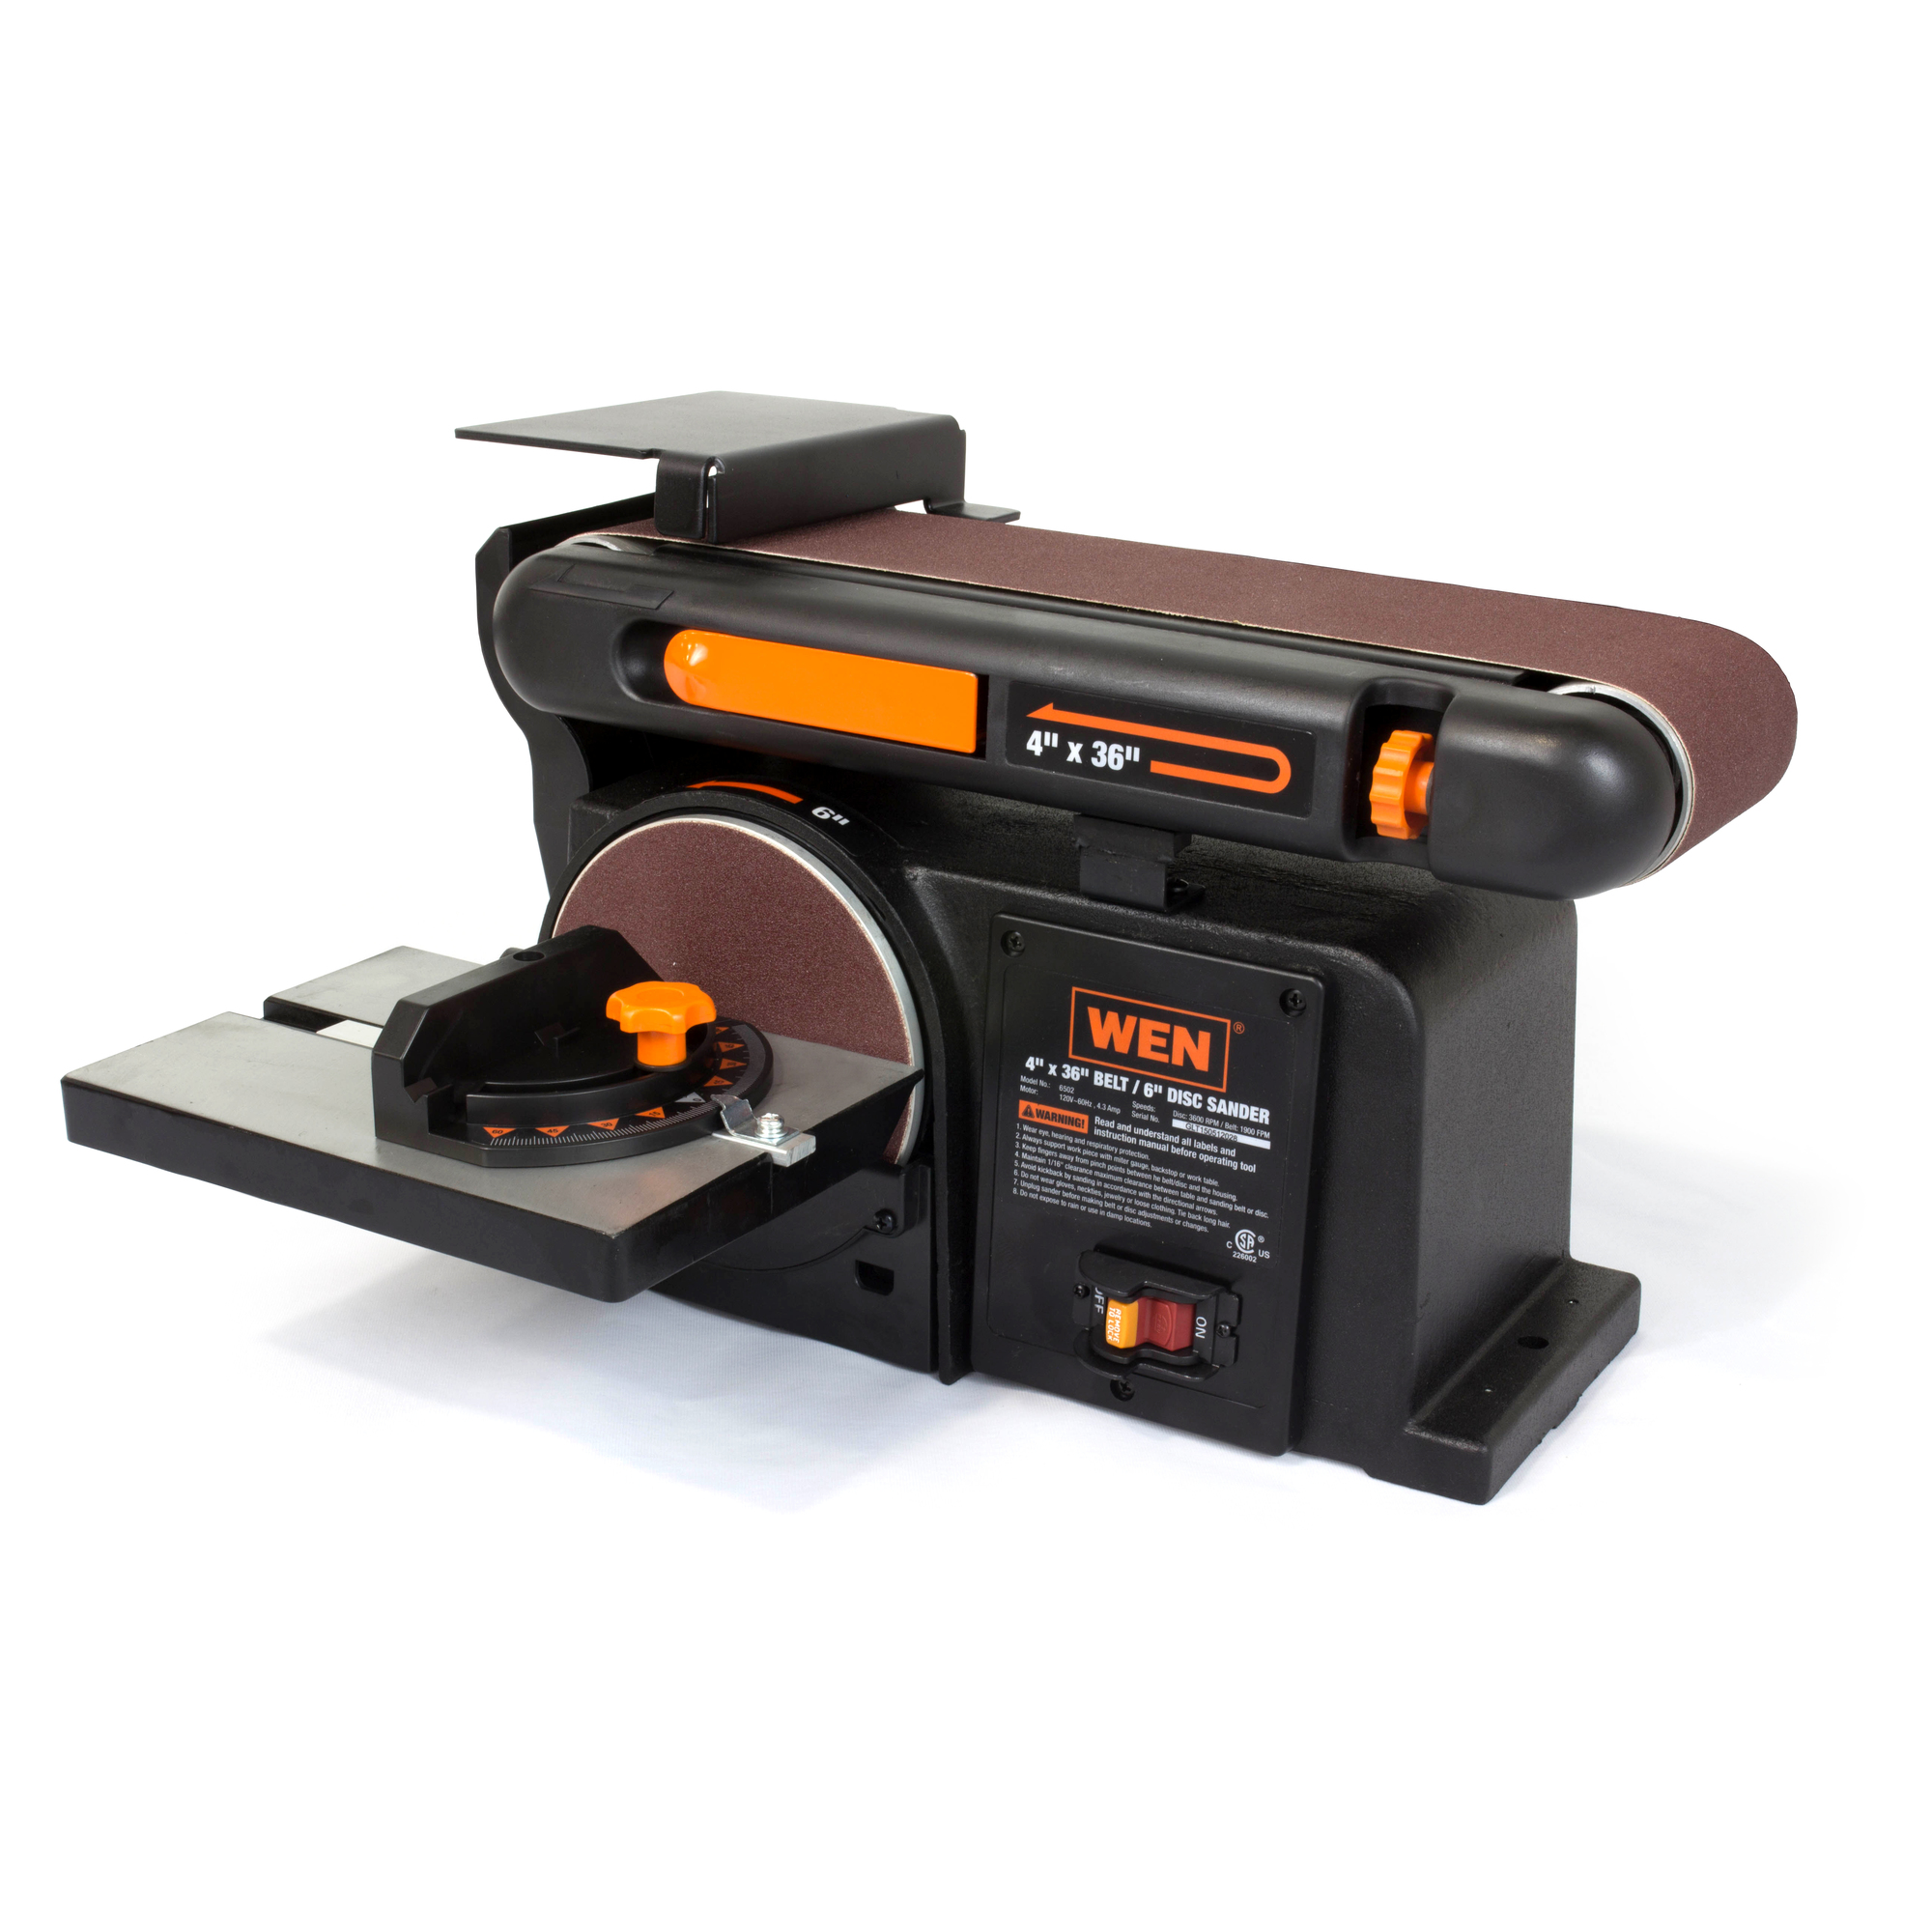 WEN, 4.3-Amp 4 x 36Inch Belt and 6Inch Disc Sander, Max. Speed 3600 OPM, Amps 4.3, Model 6502T